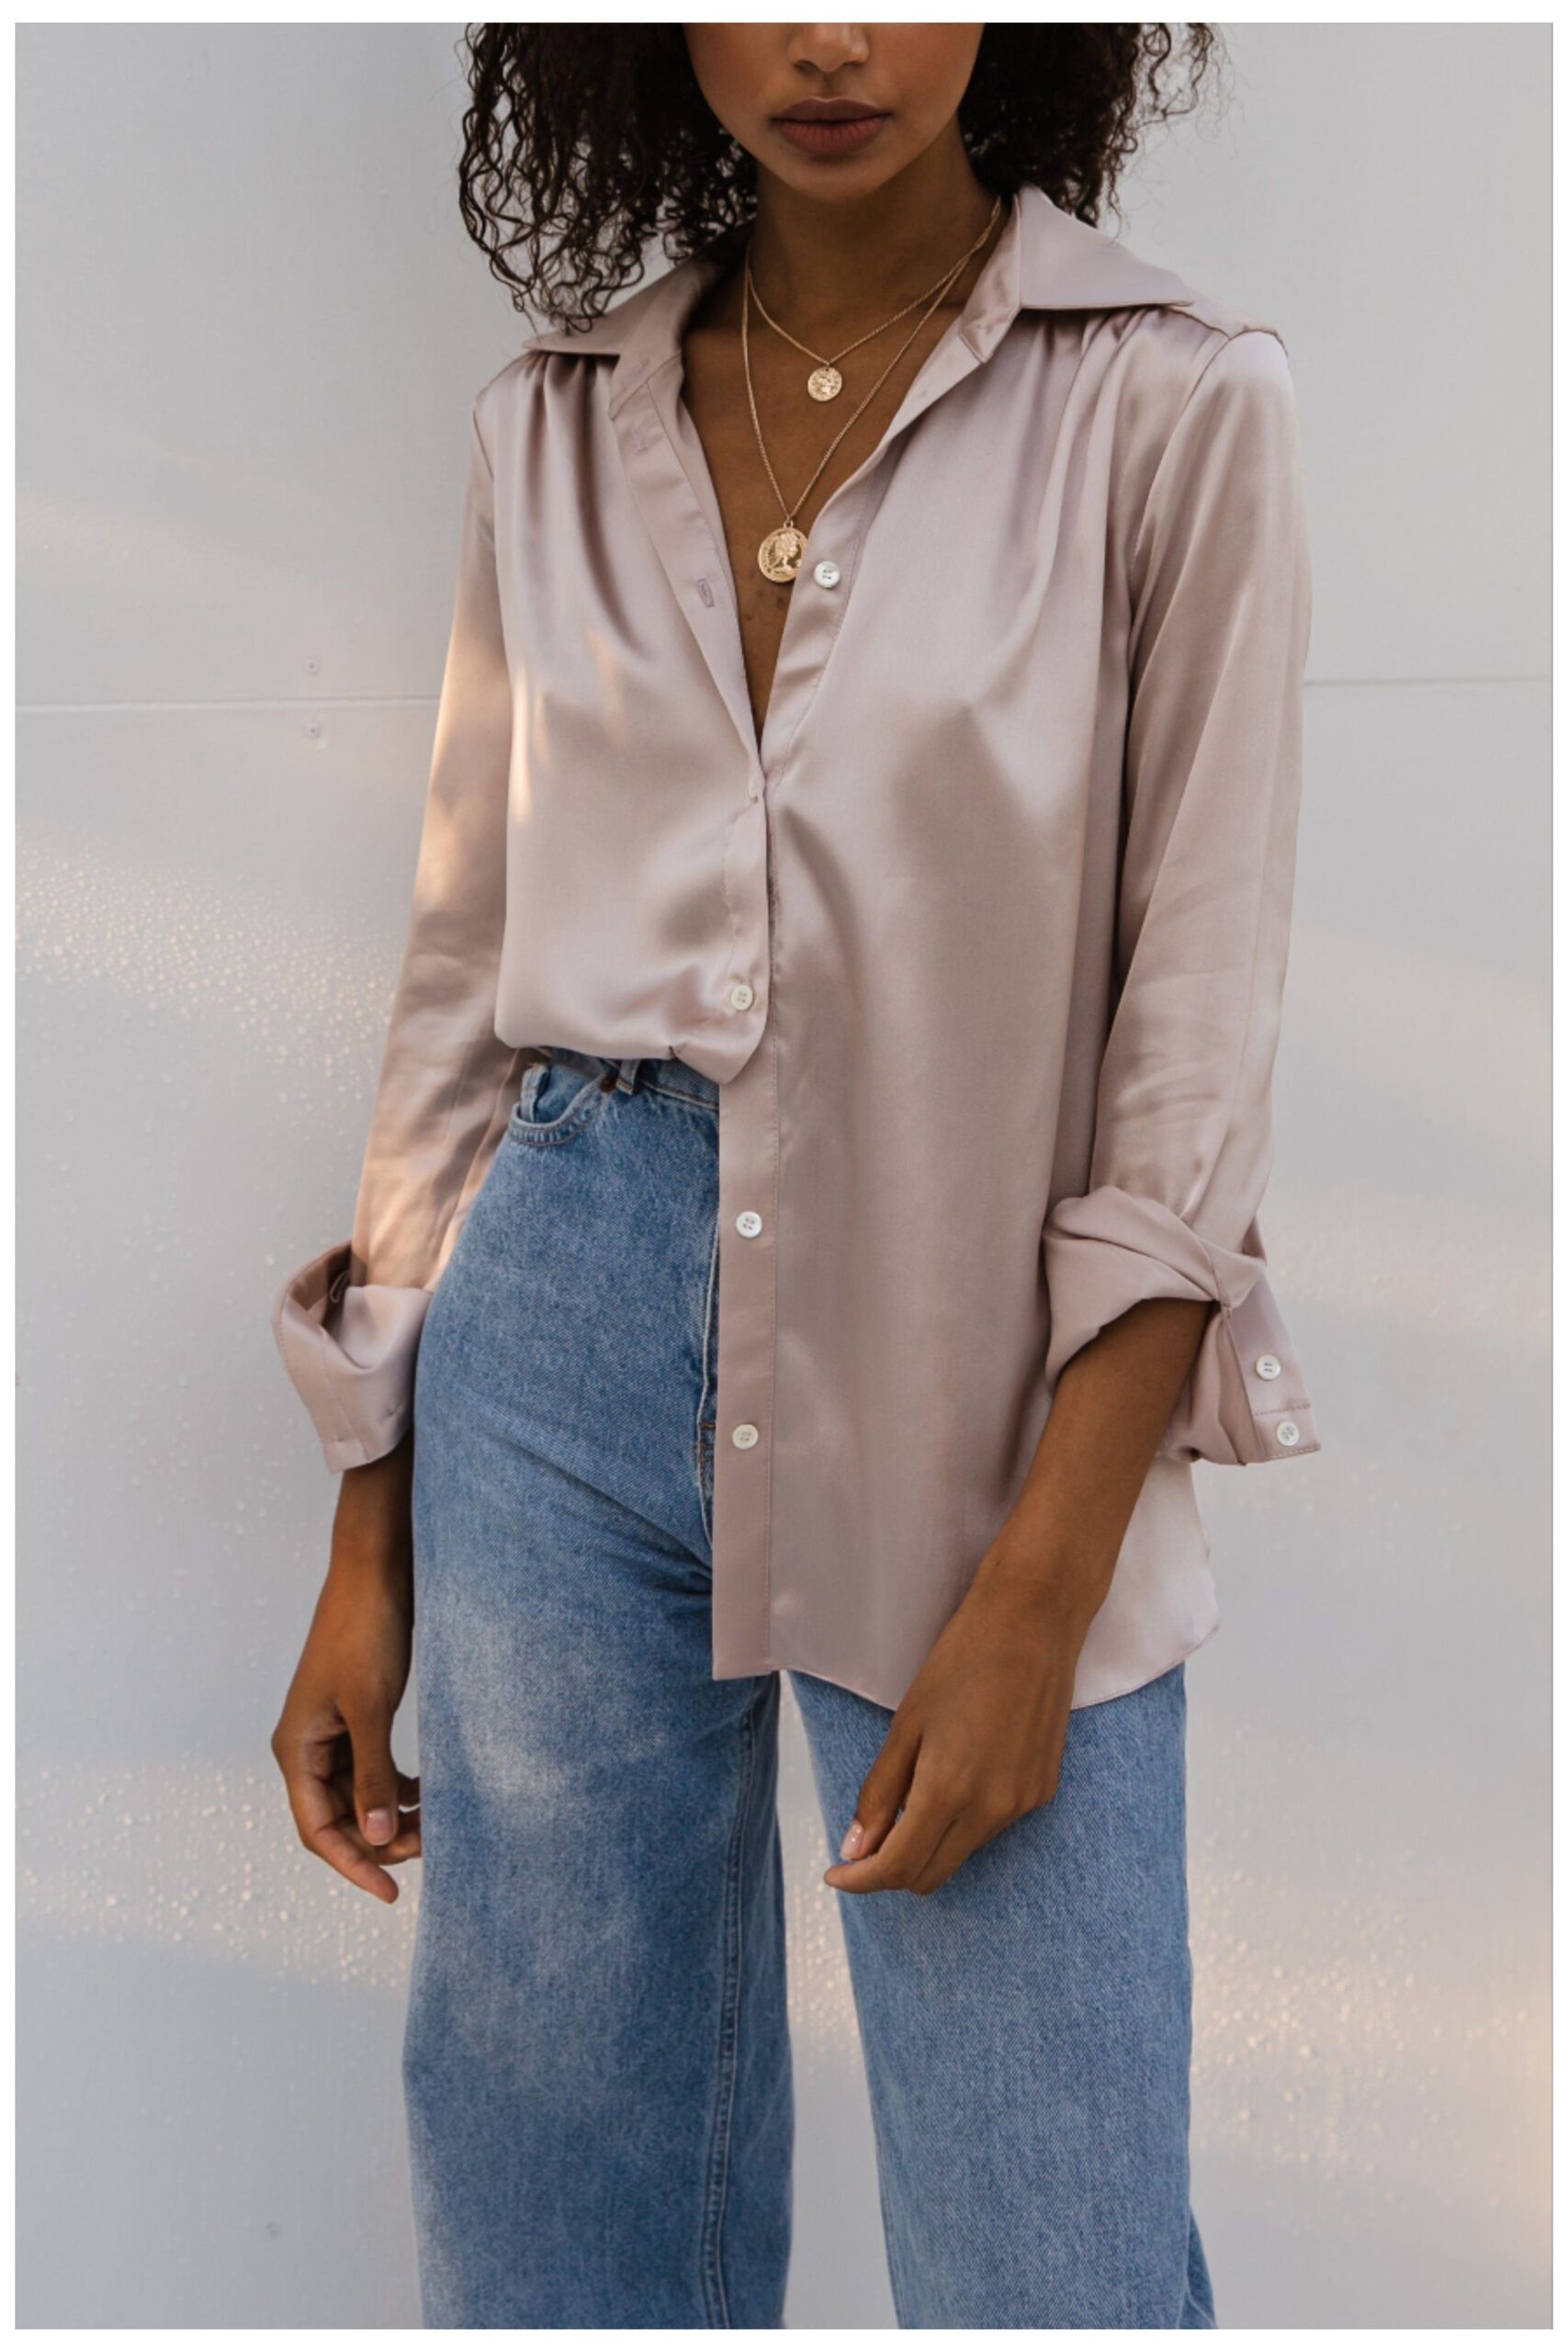 Effortless Chic: Silk Shirts for Luxurious Comfort